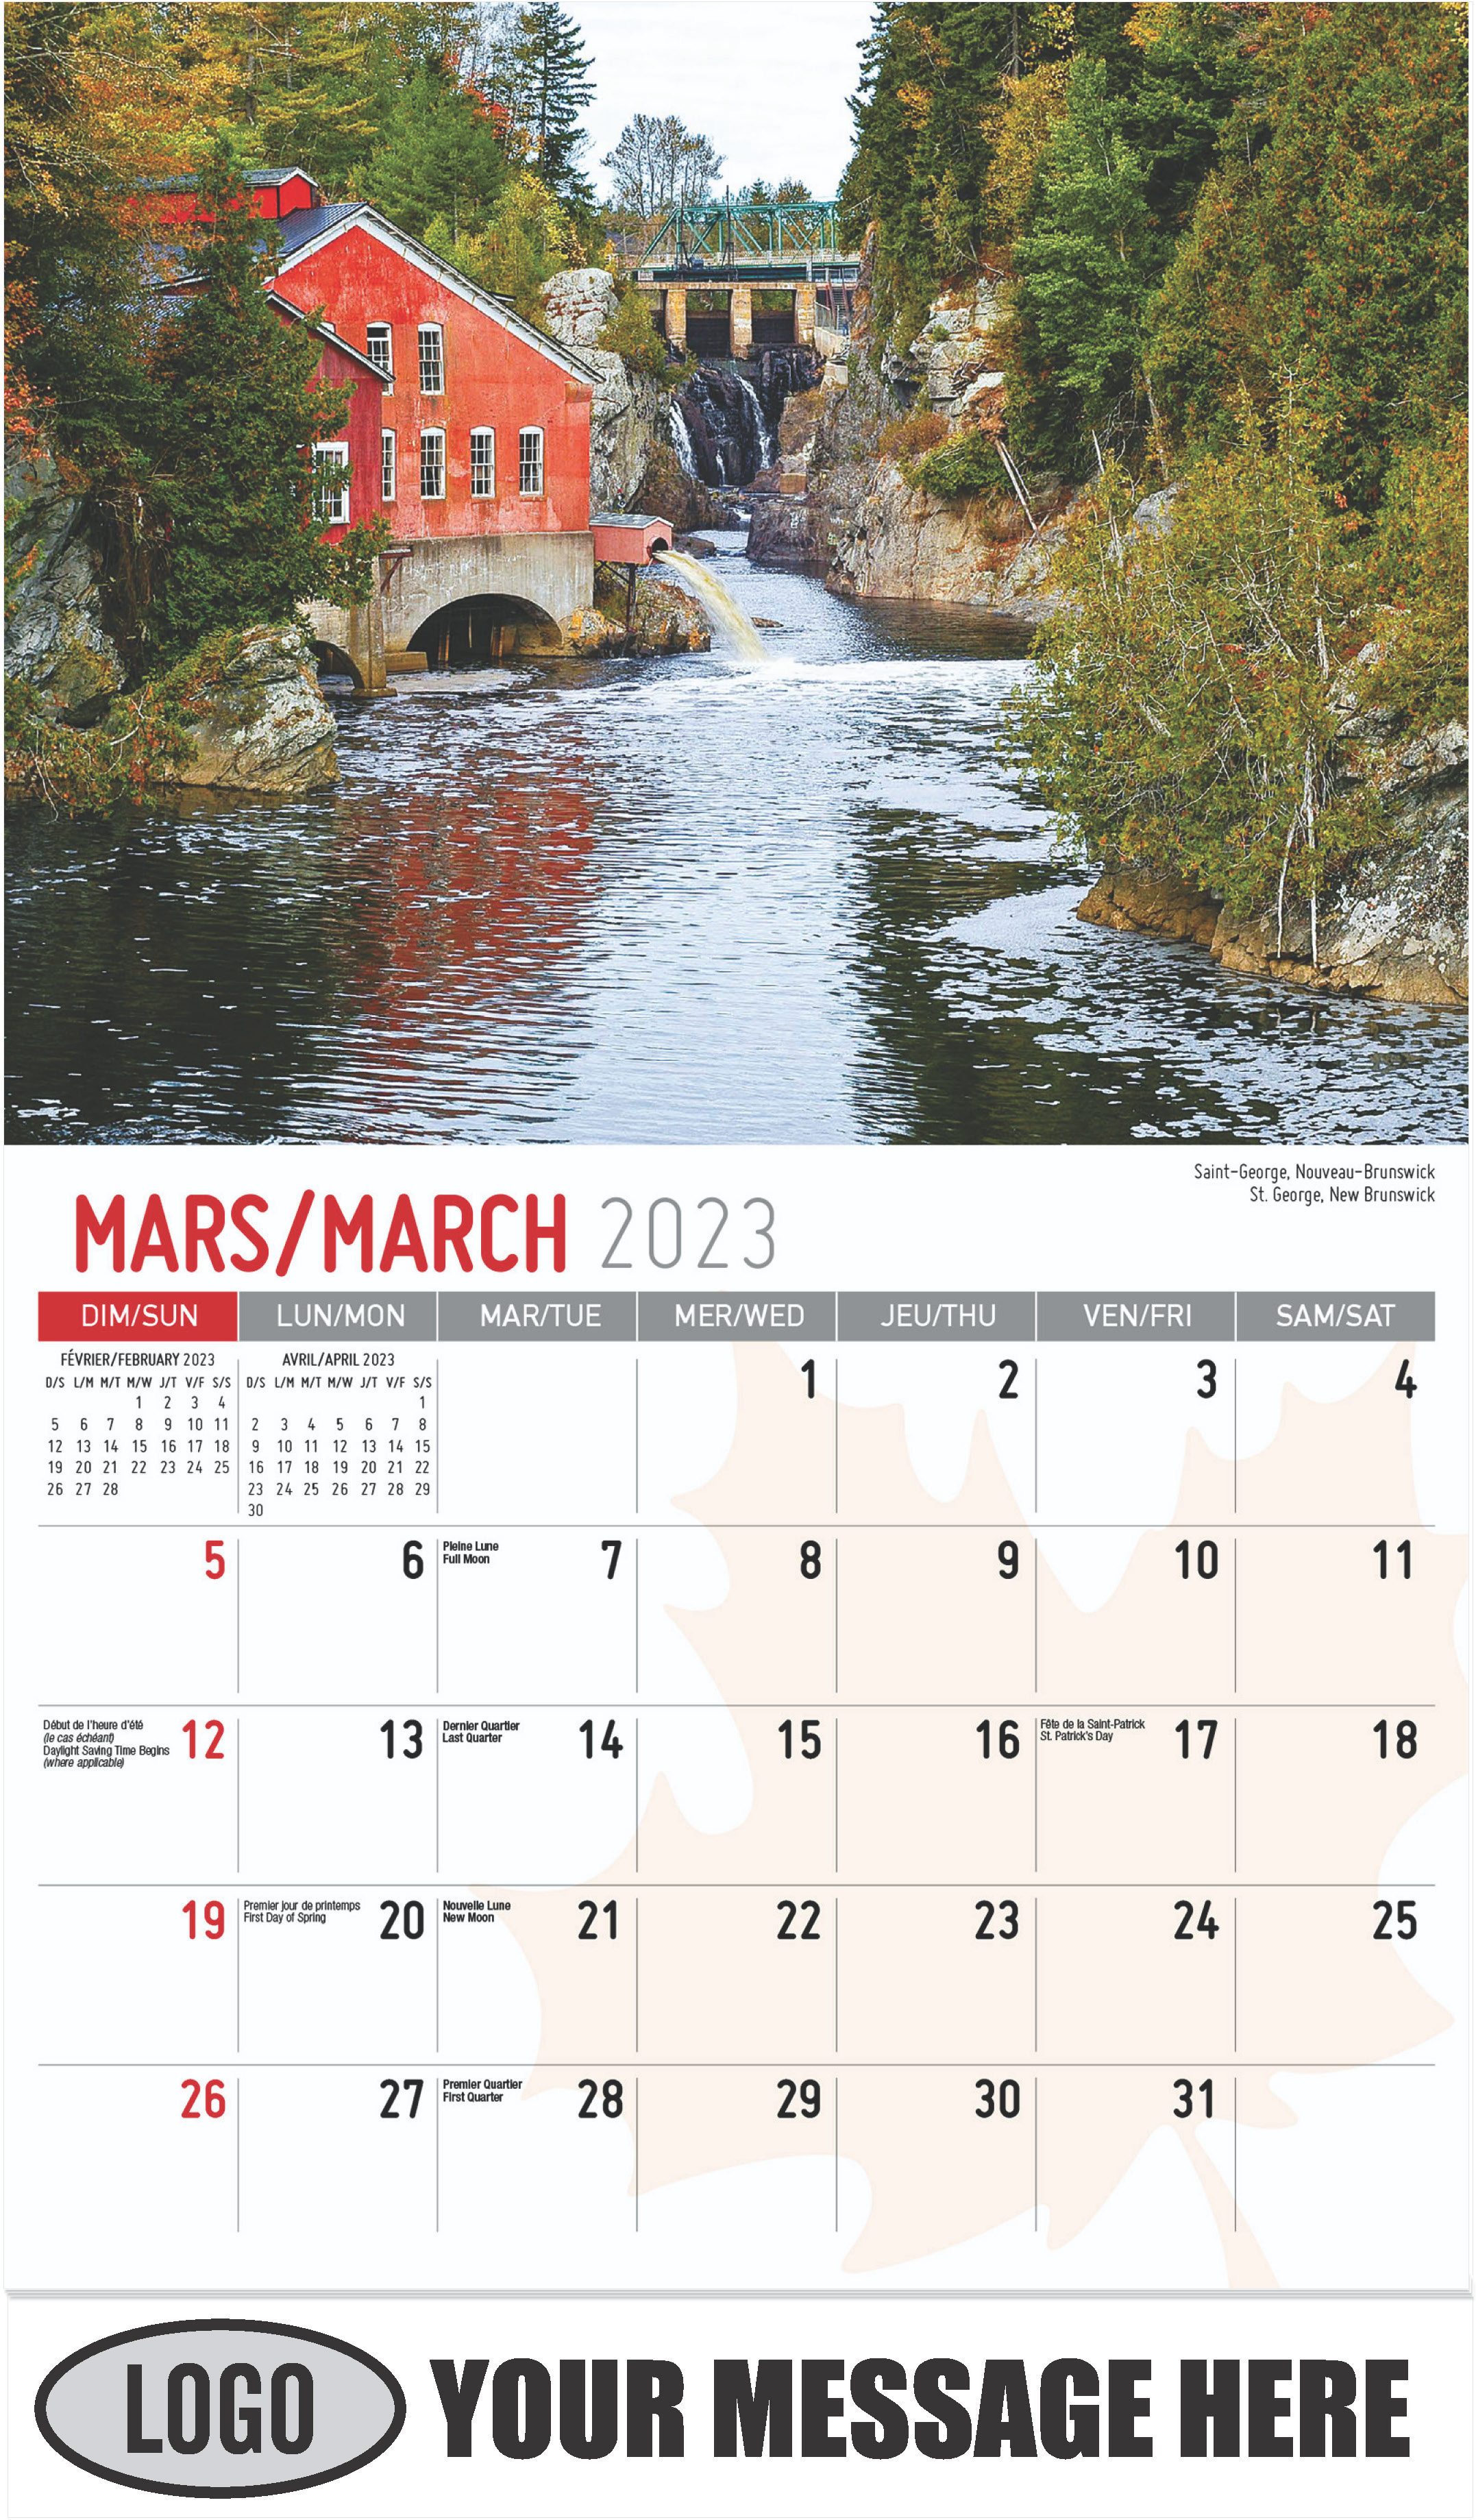 St. George, New Brunswick - March - Scenes of Canada(French-English bilingual) 2023 Promotional Calendar